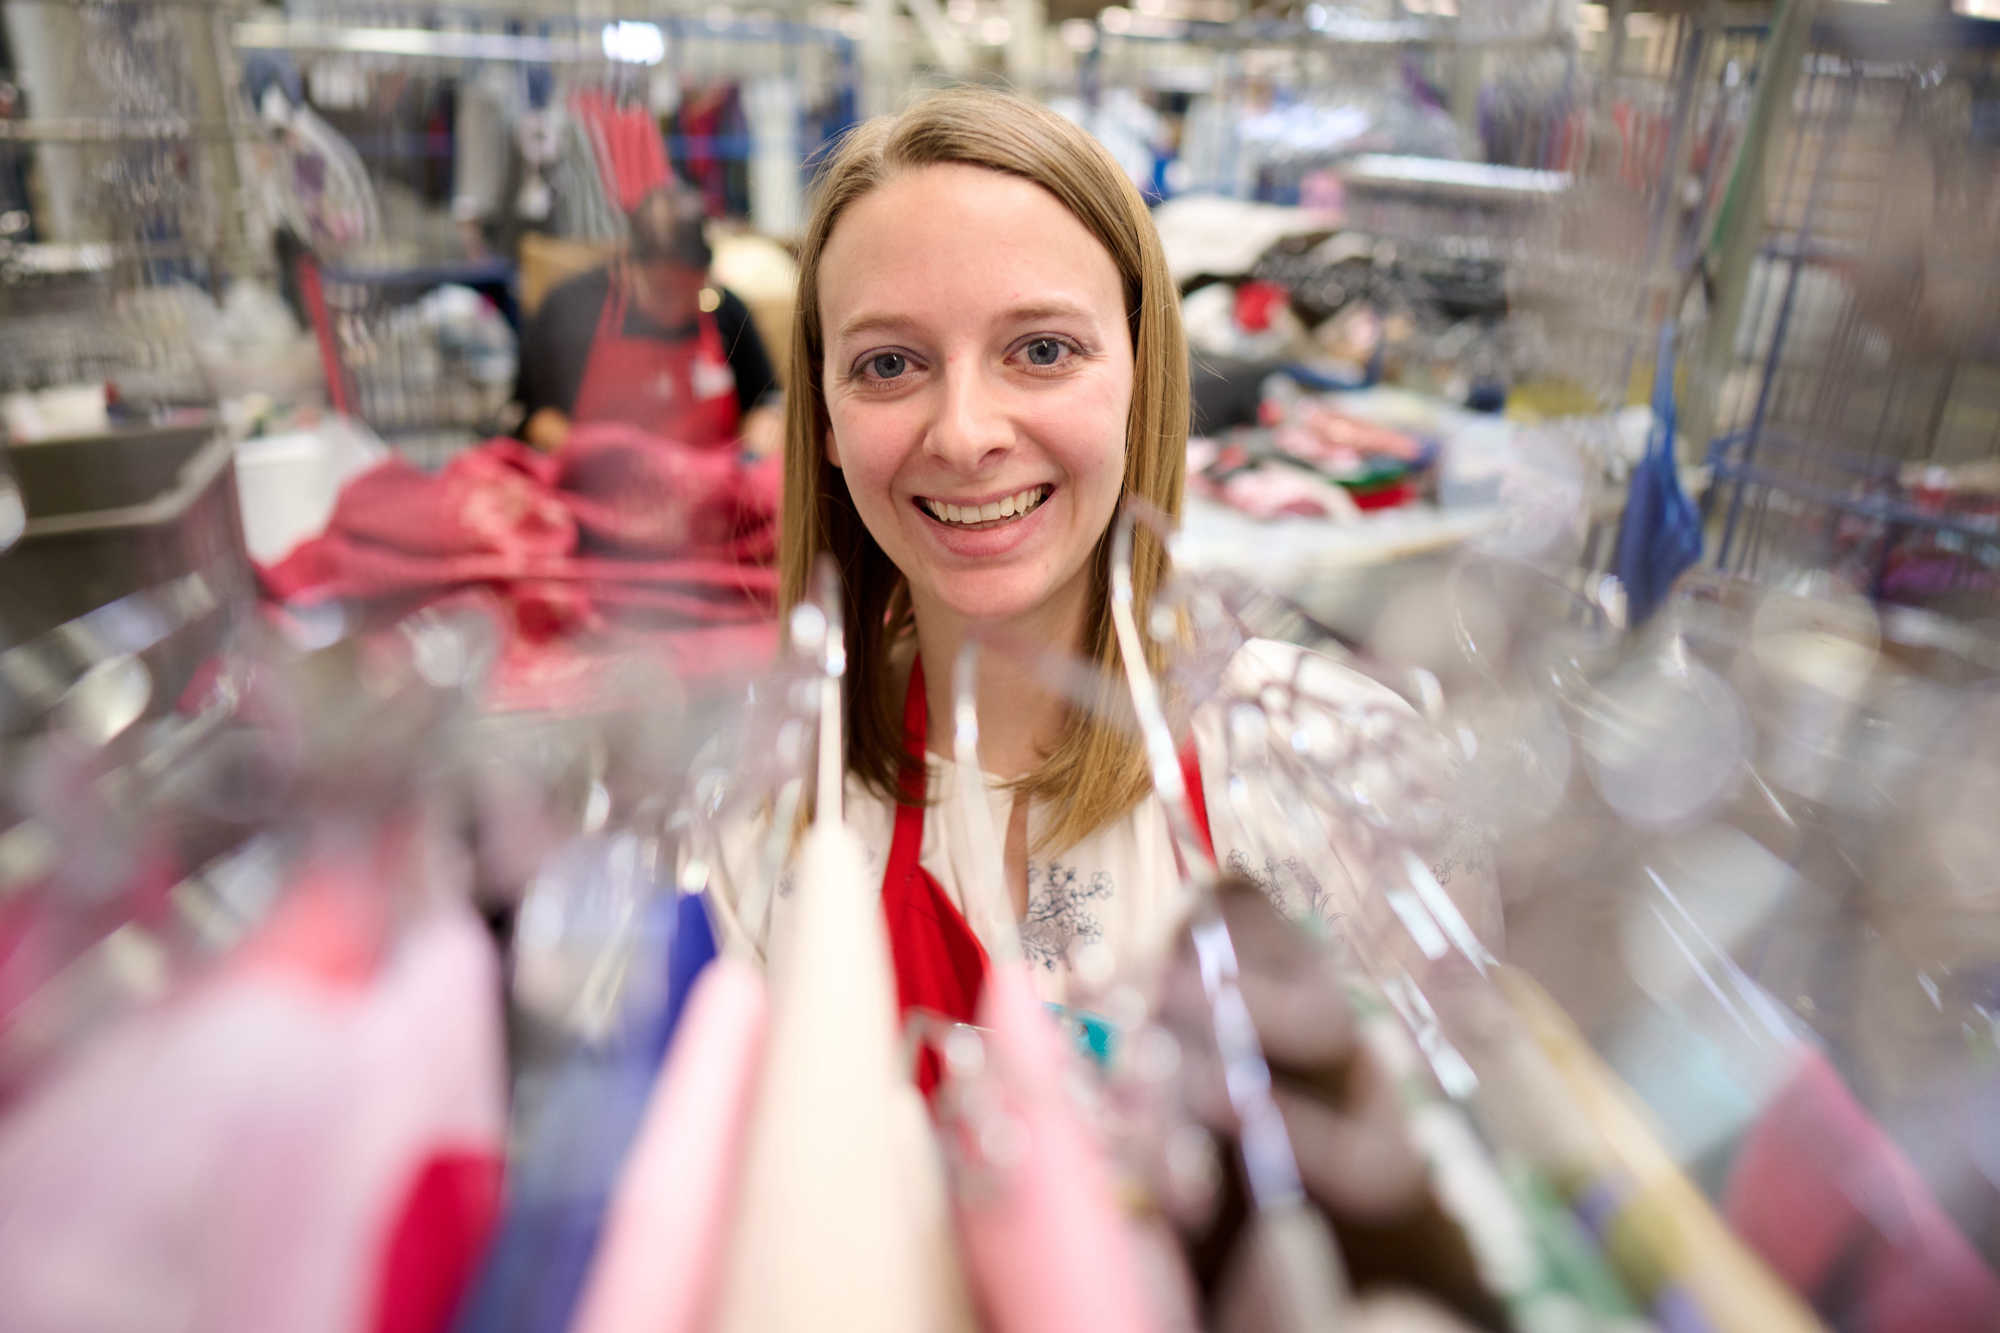 thrift store employee smiles as she hangs clothes on a clothing rack